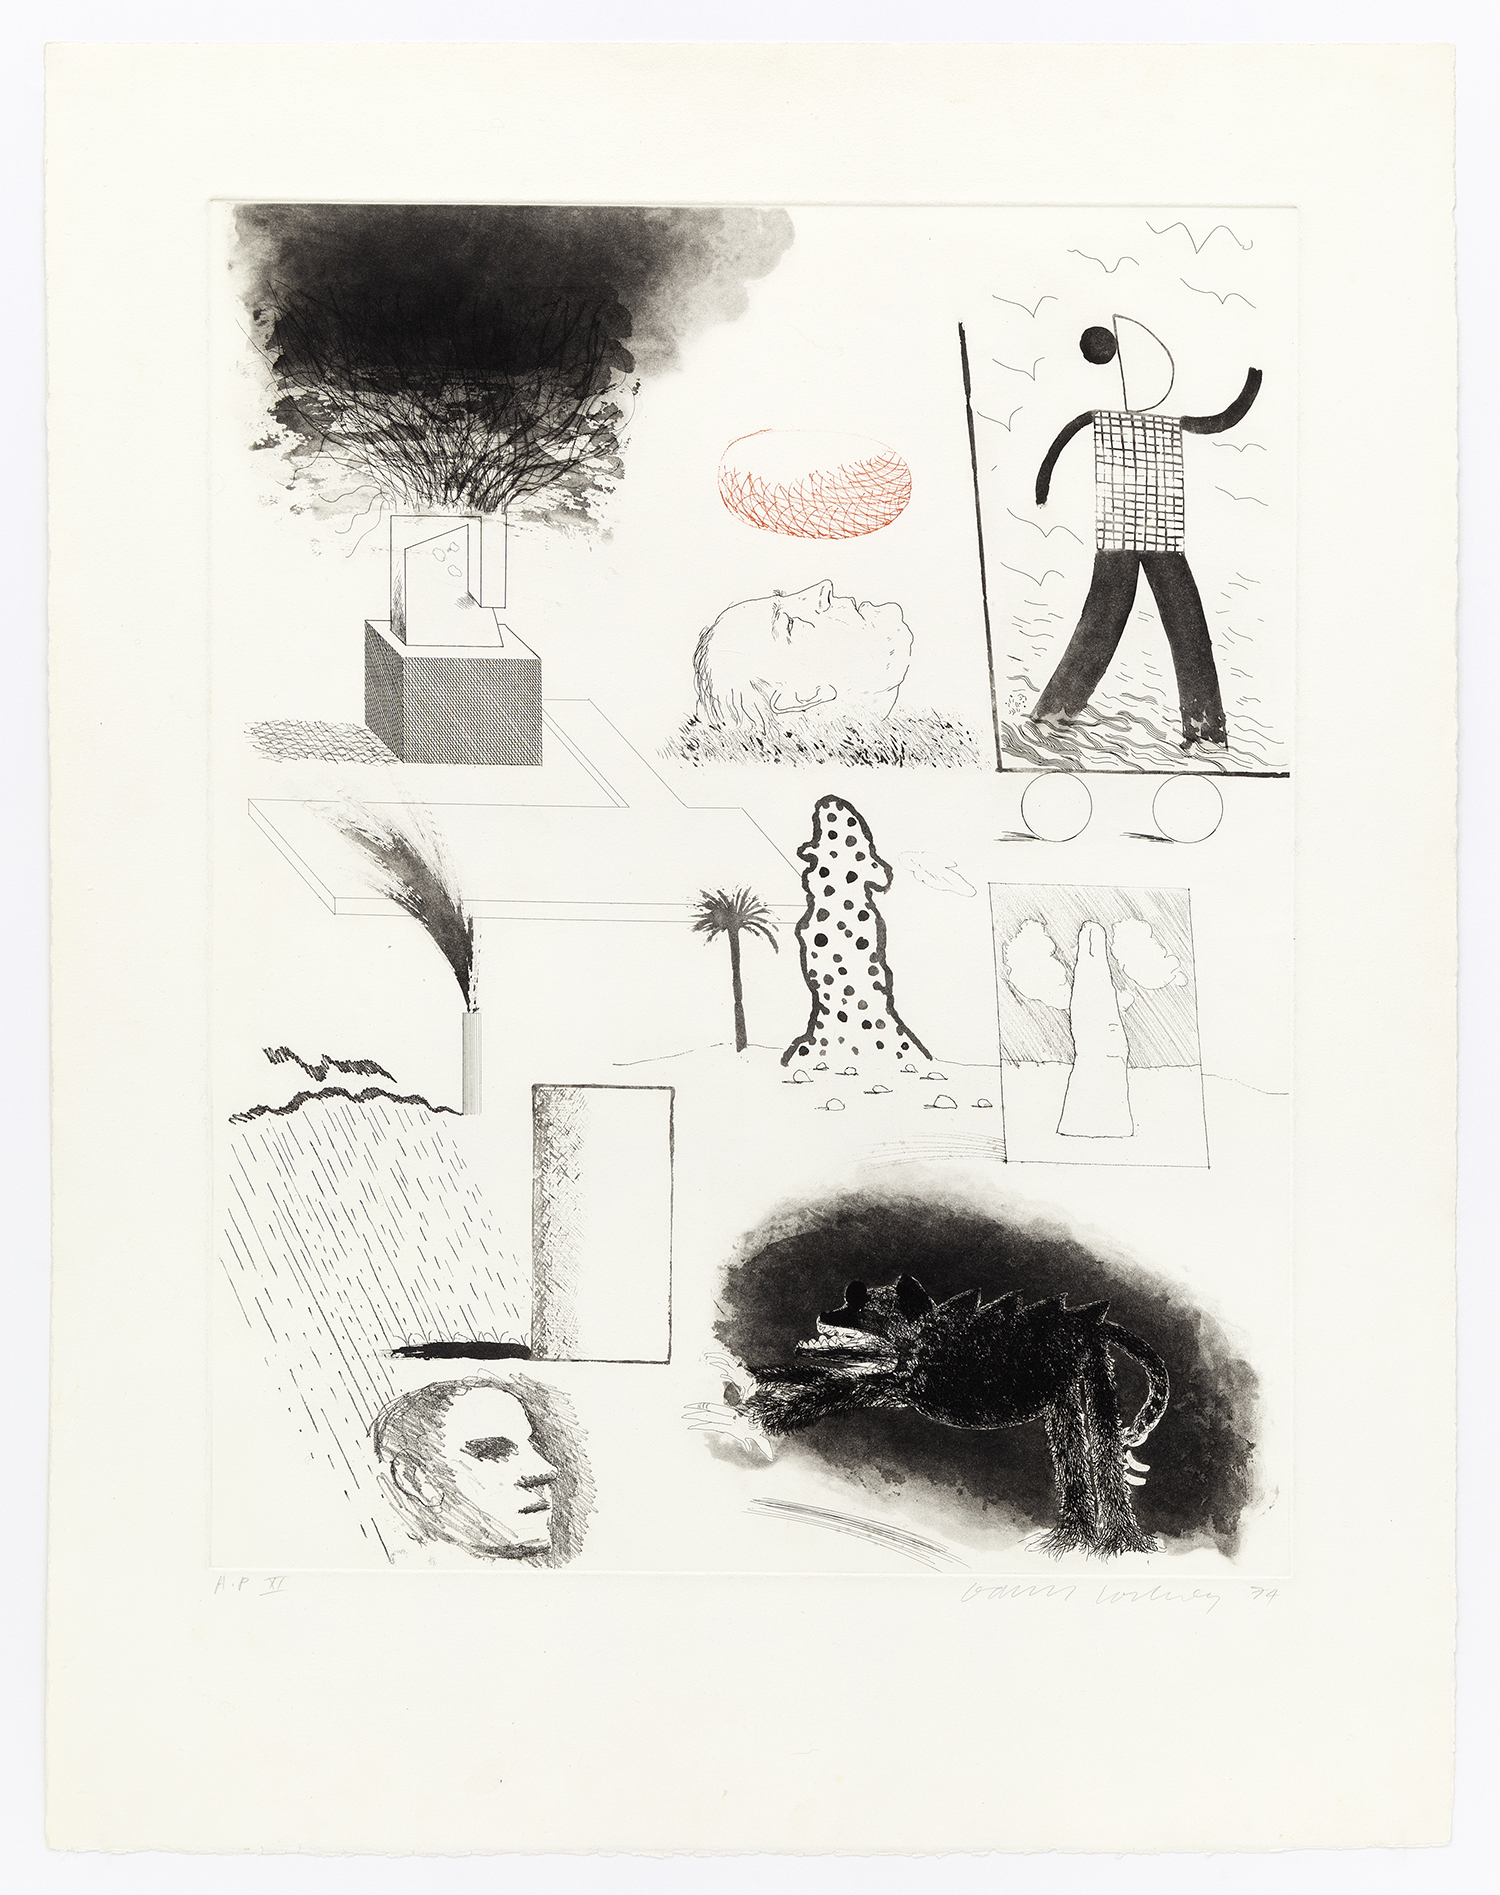 Showing Maurice the Sugar Lift, 1974, Etching with drypoint, sugar-lift aquatint and roulette, 36 x 28 inches (91.4 x 71.1 cm), Edition of 75